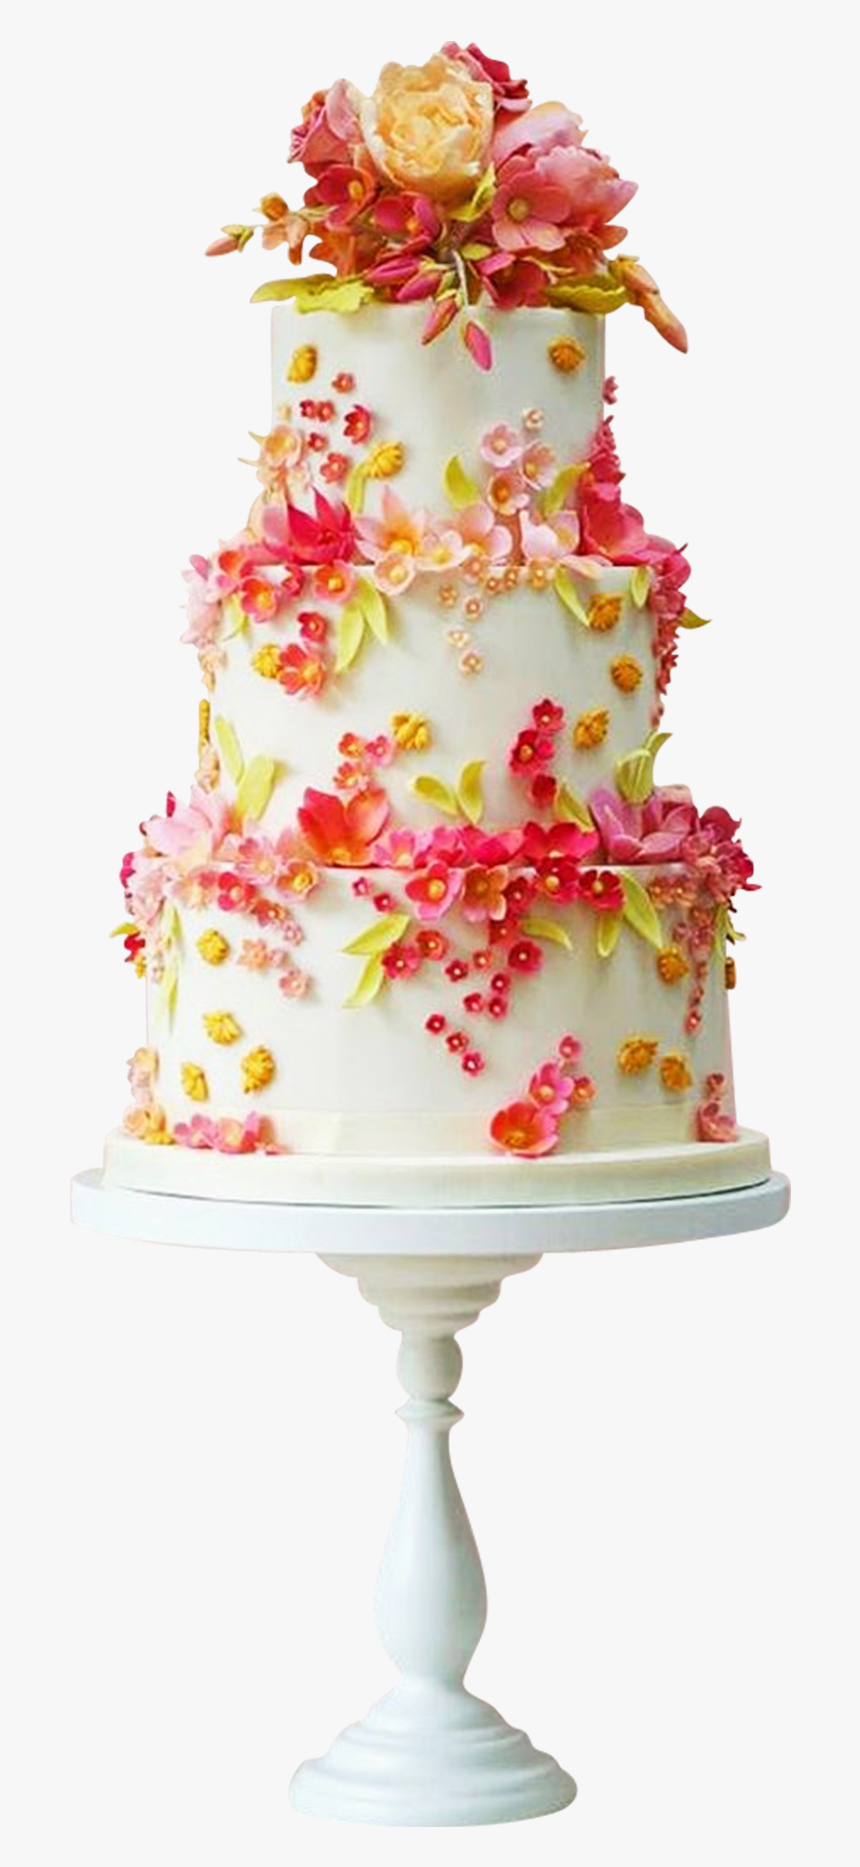 Wedding Cake Png - Cake With Flowers Free Download, Transparent Png, Free Download